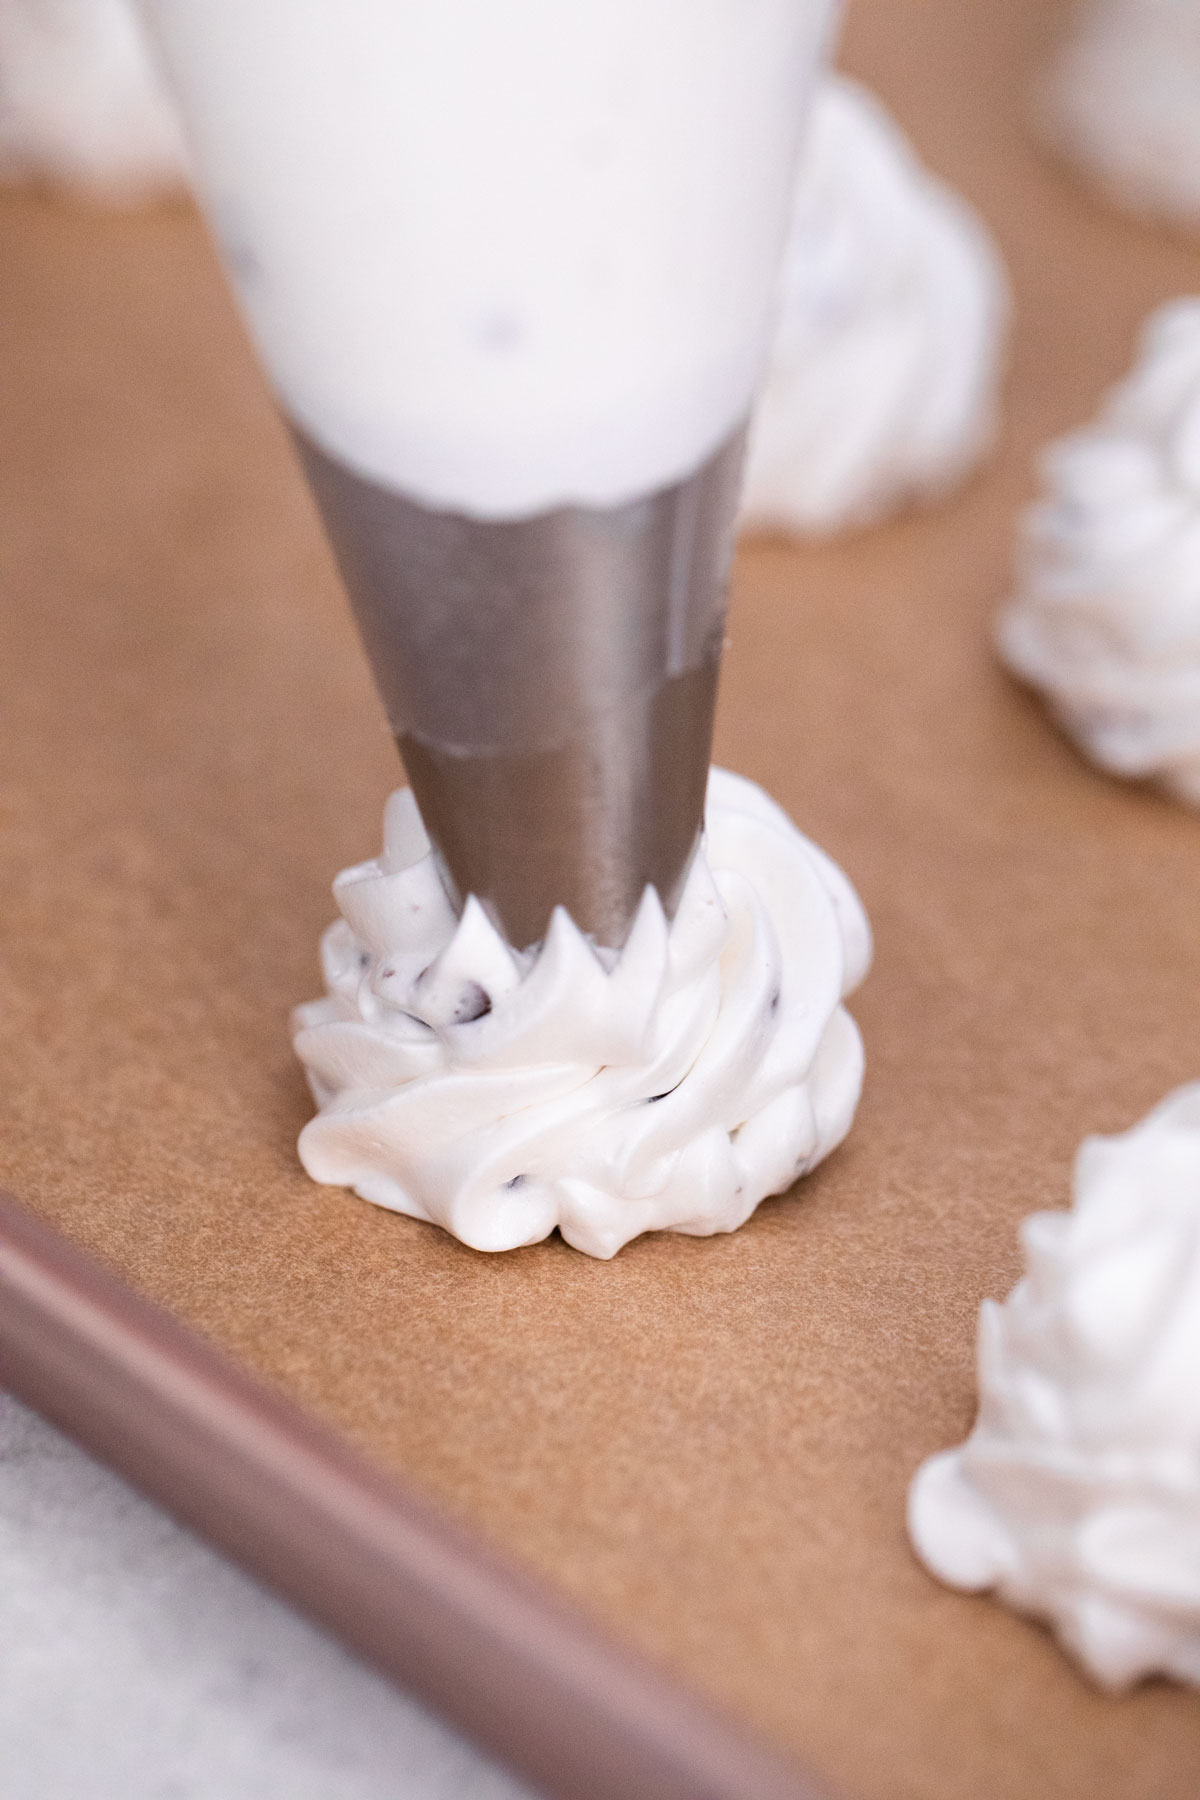 A pastry bag with a metal tip piping meringue onto parchment paper, forming a swirl next to other completed swirls.